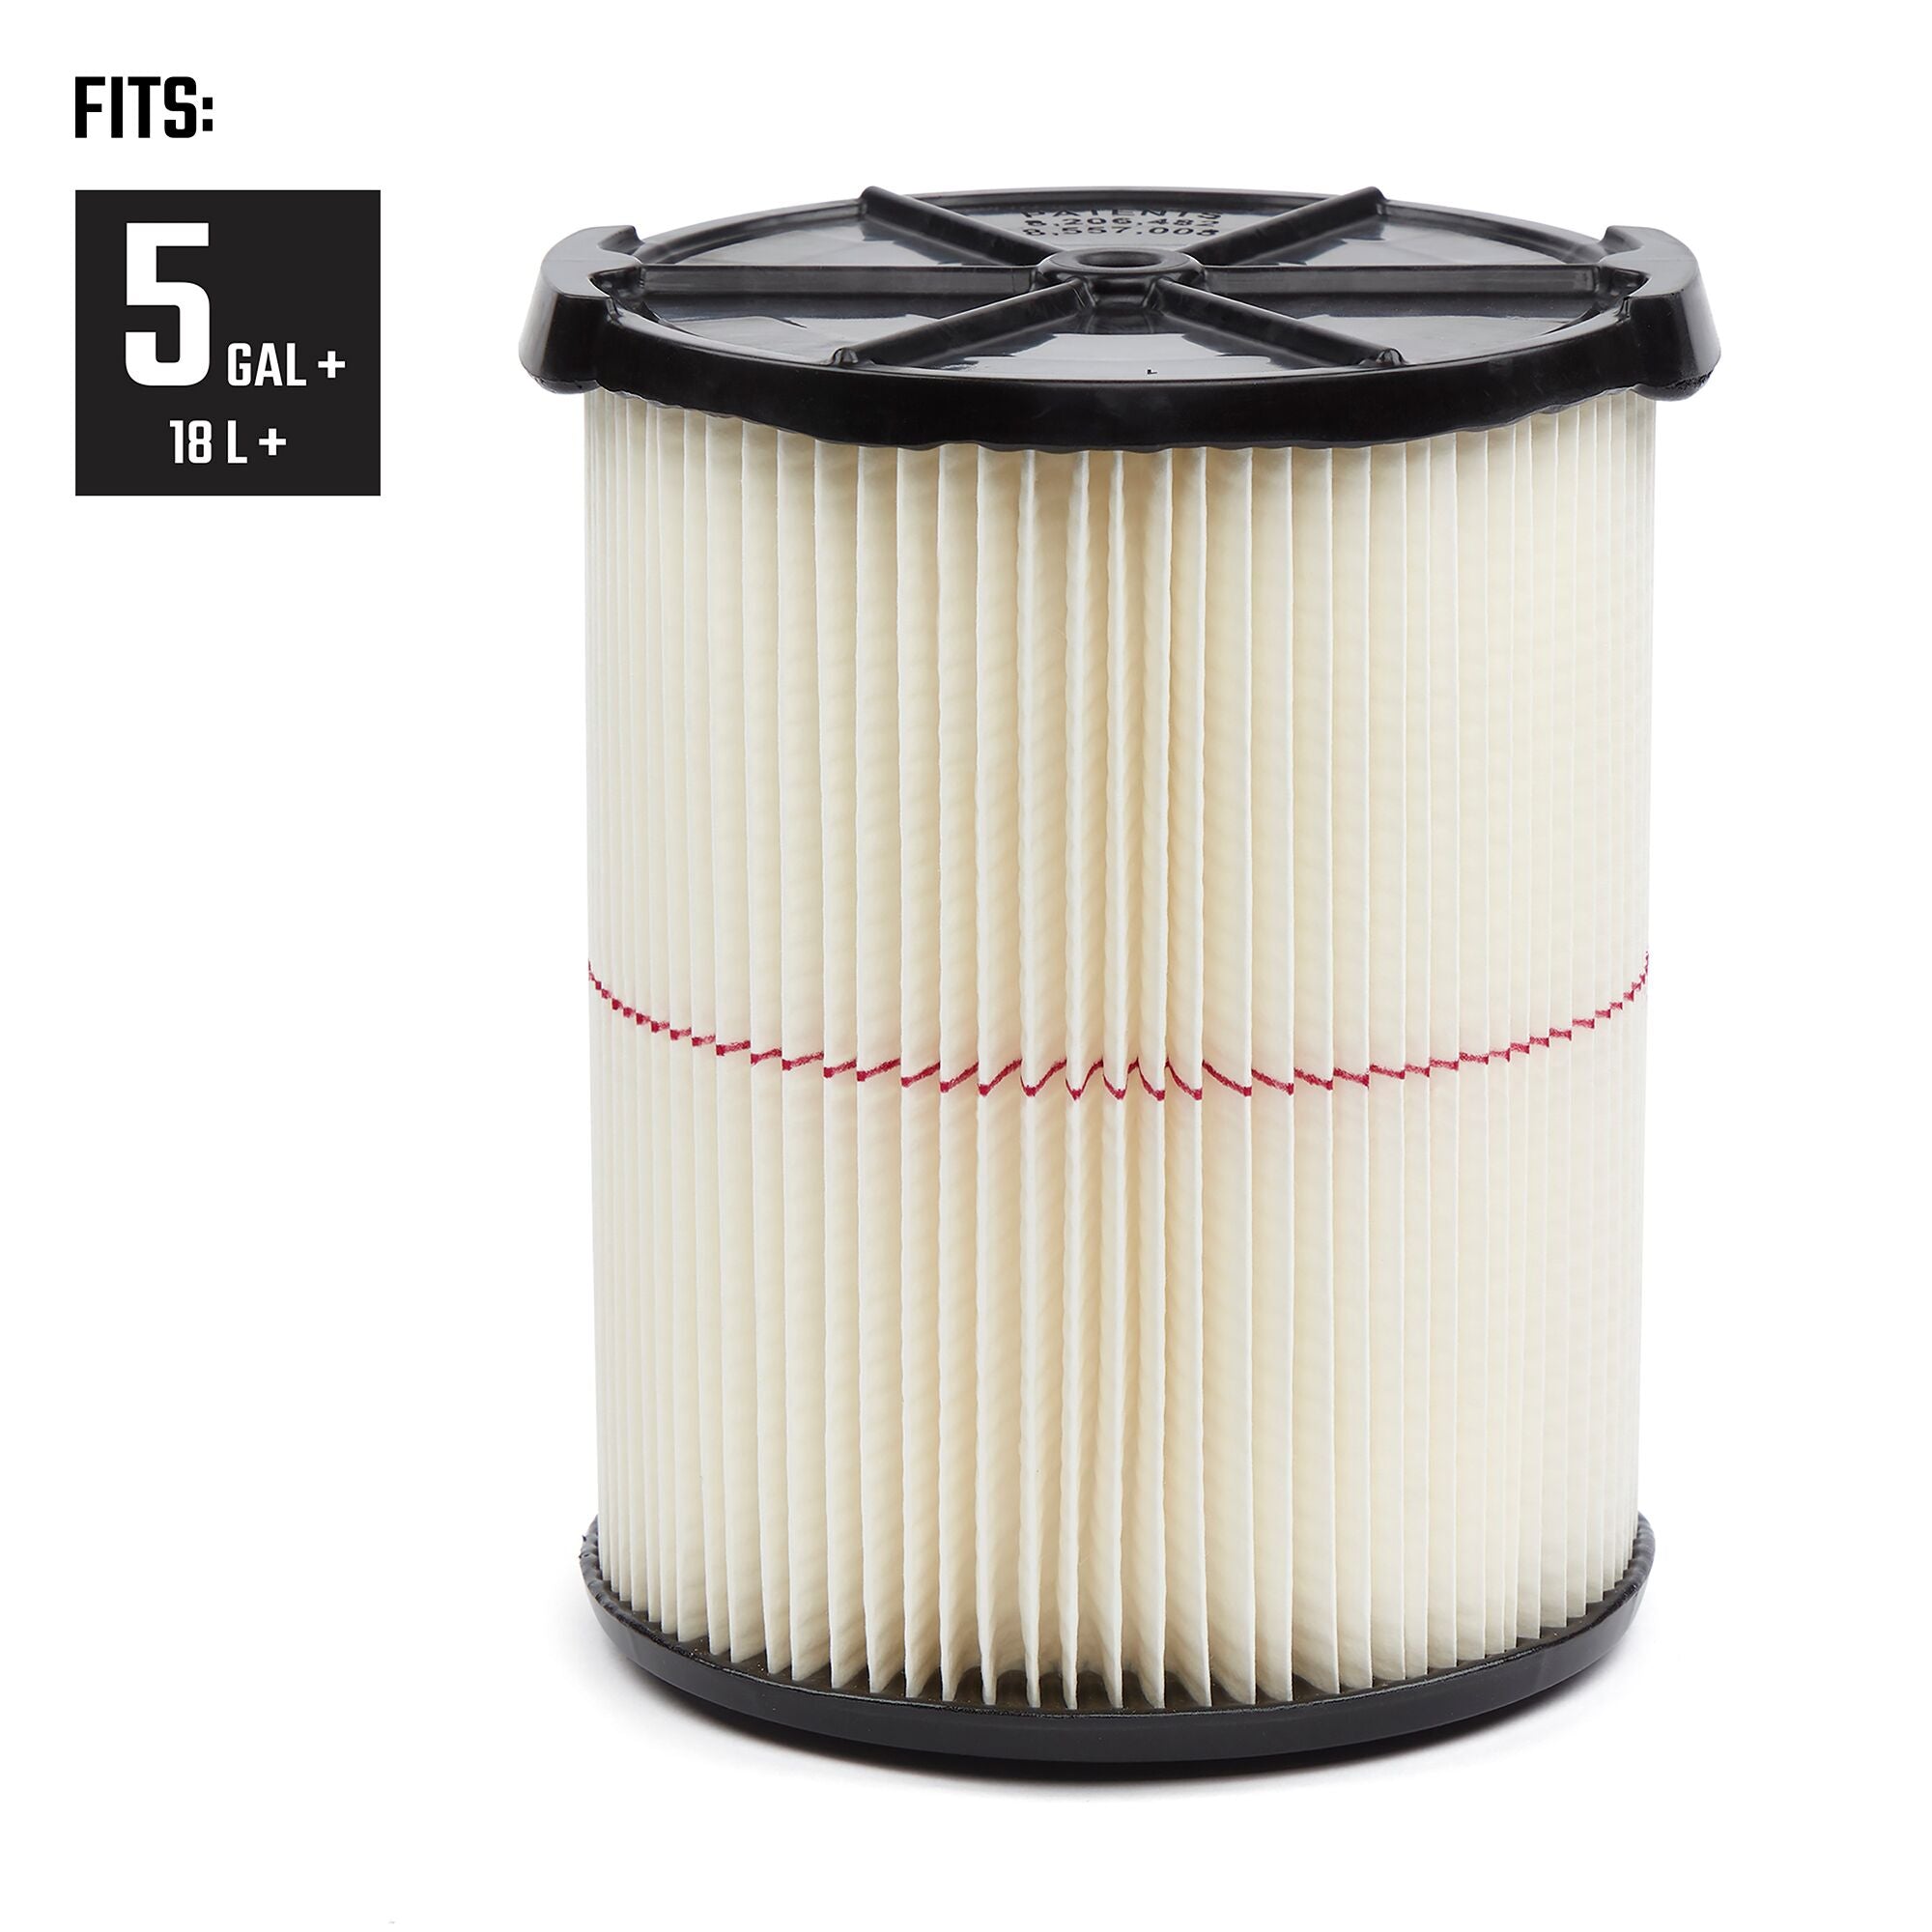 Front of General Dirt Filter illustrating compatibility with 5-20 Gallon CRAFTSMAN Shop Vacuums 